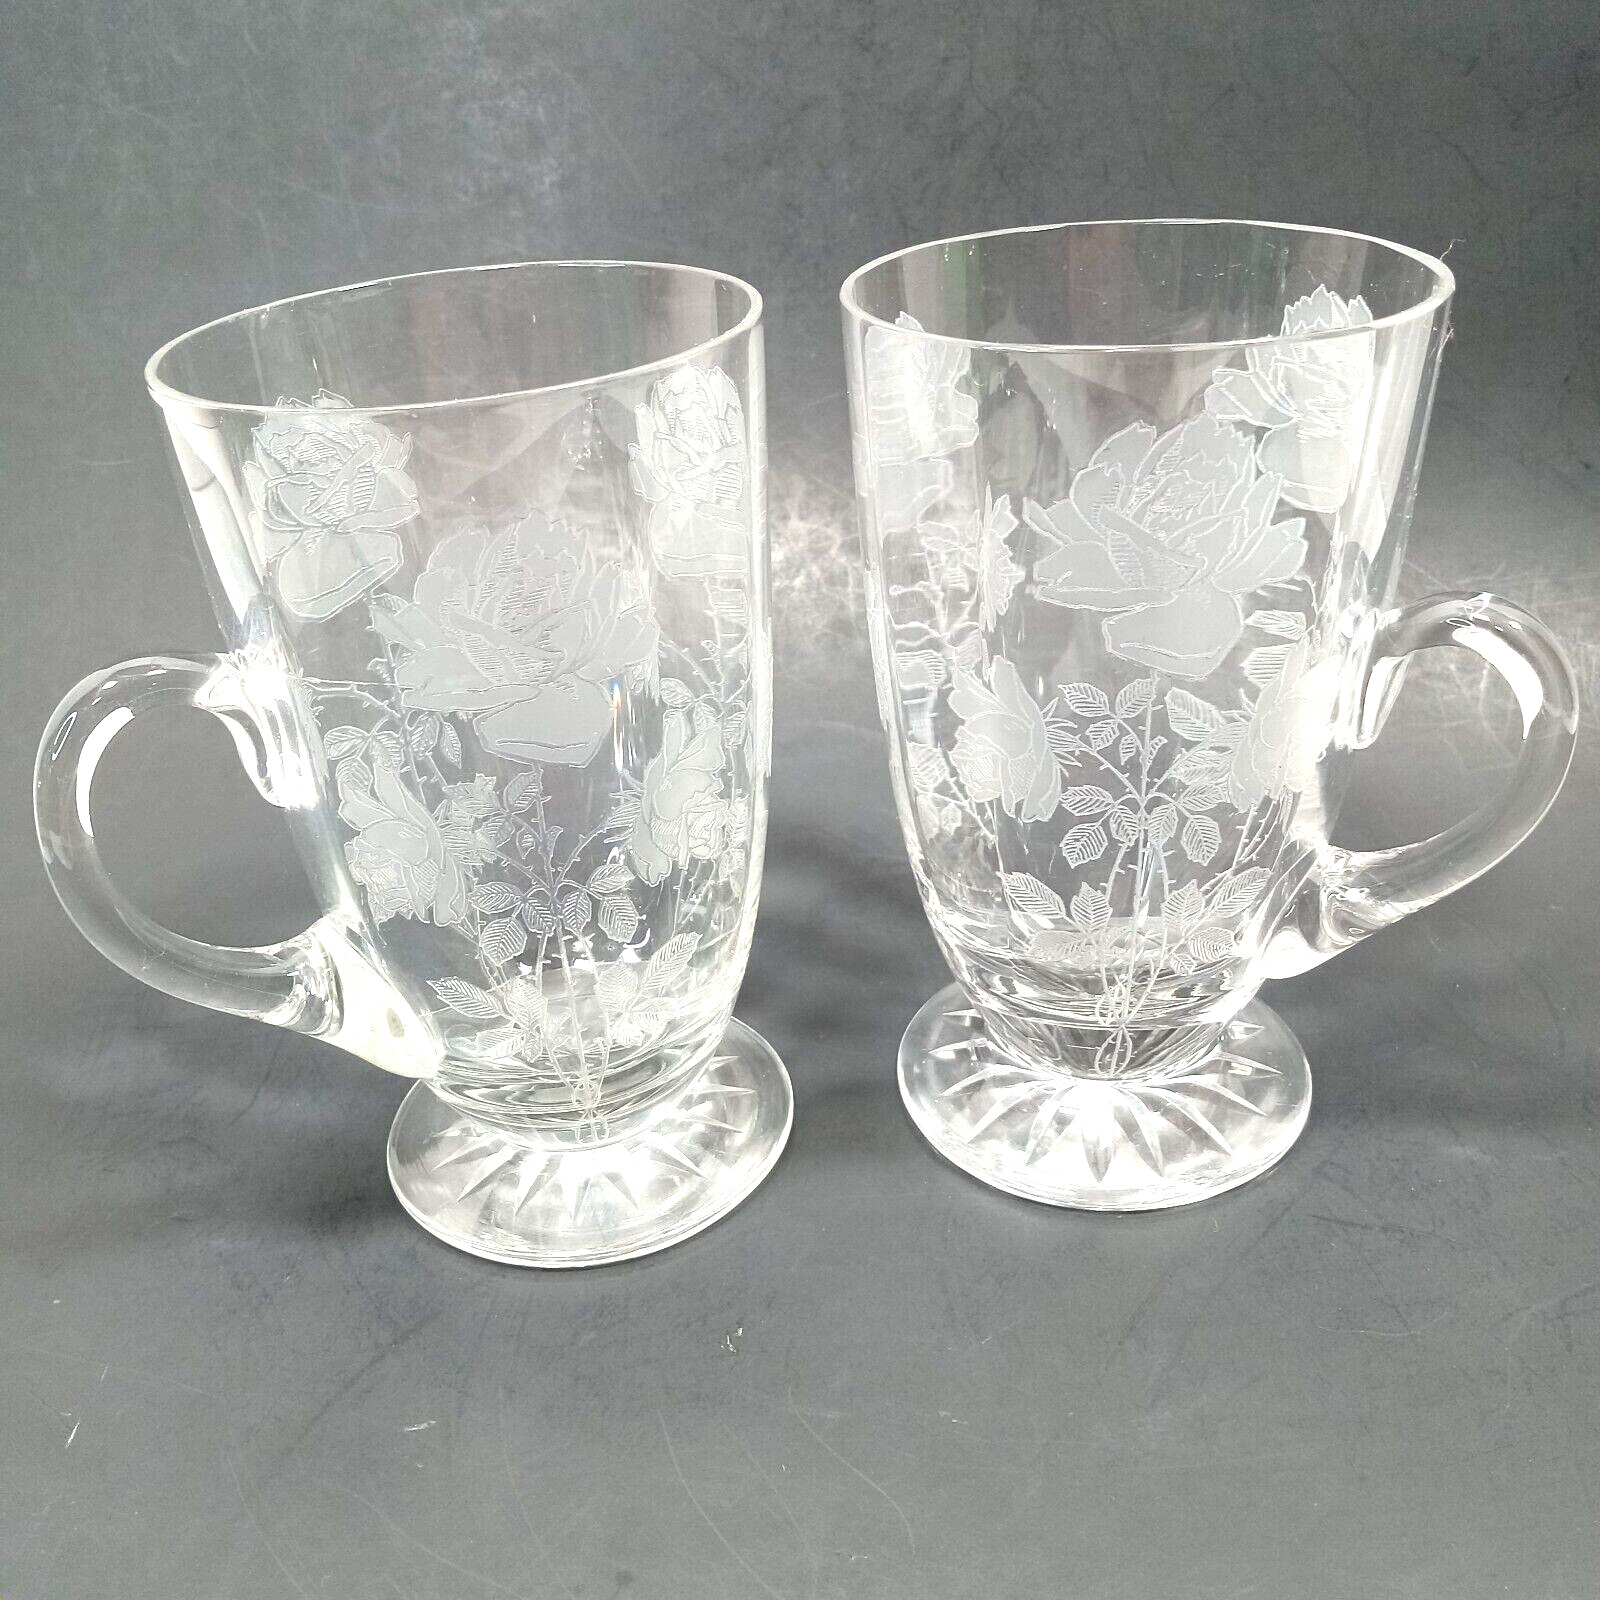 2 Fry Rose Etched Roses on Stem Coffee Cup Mug